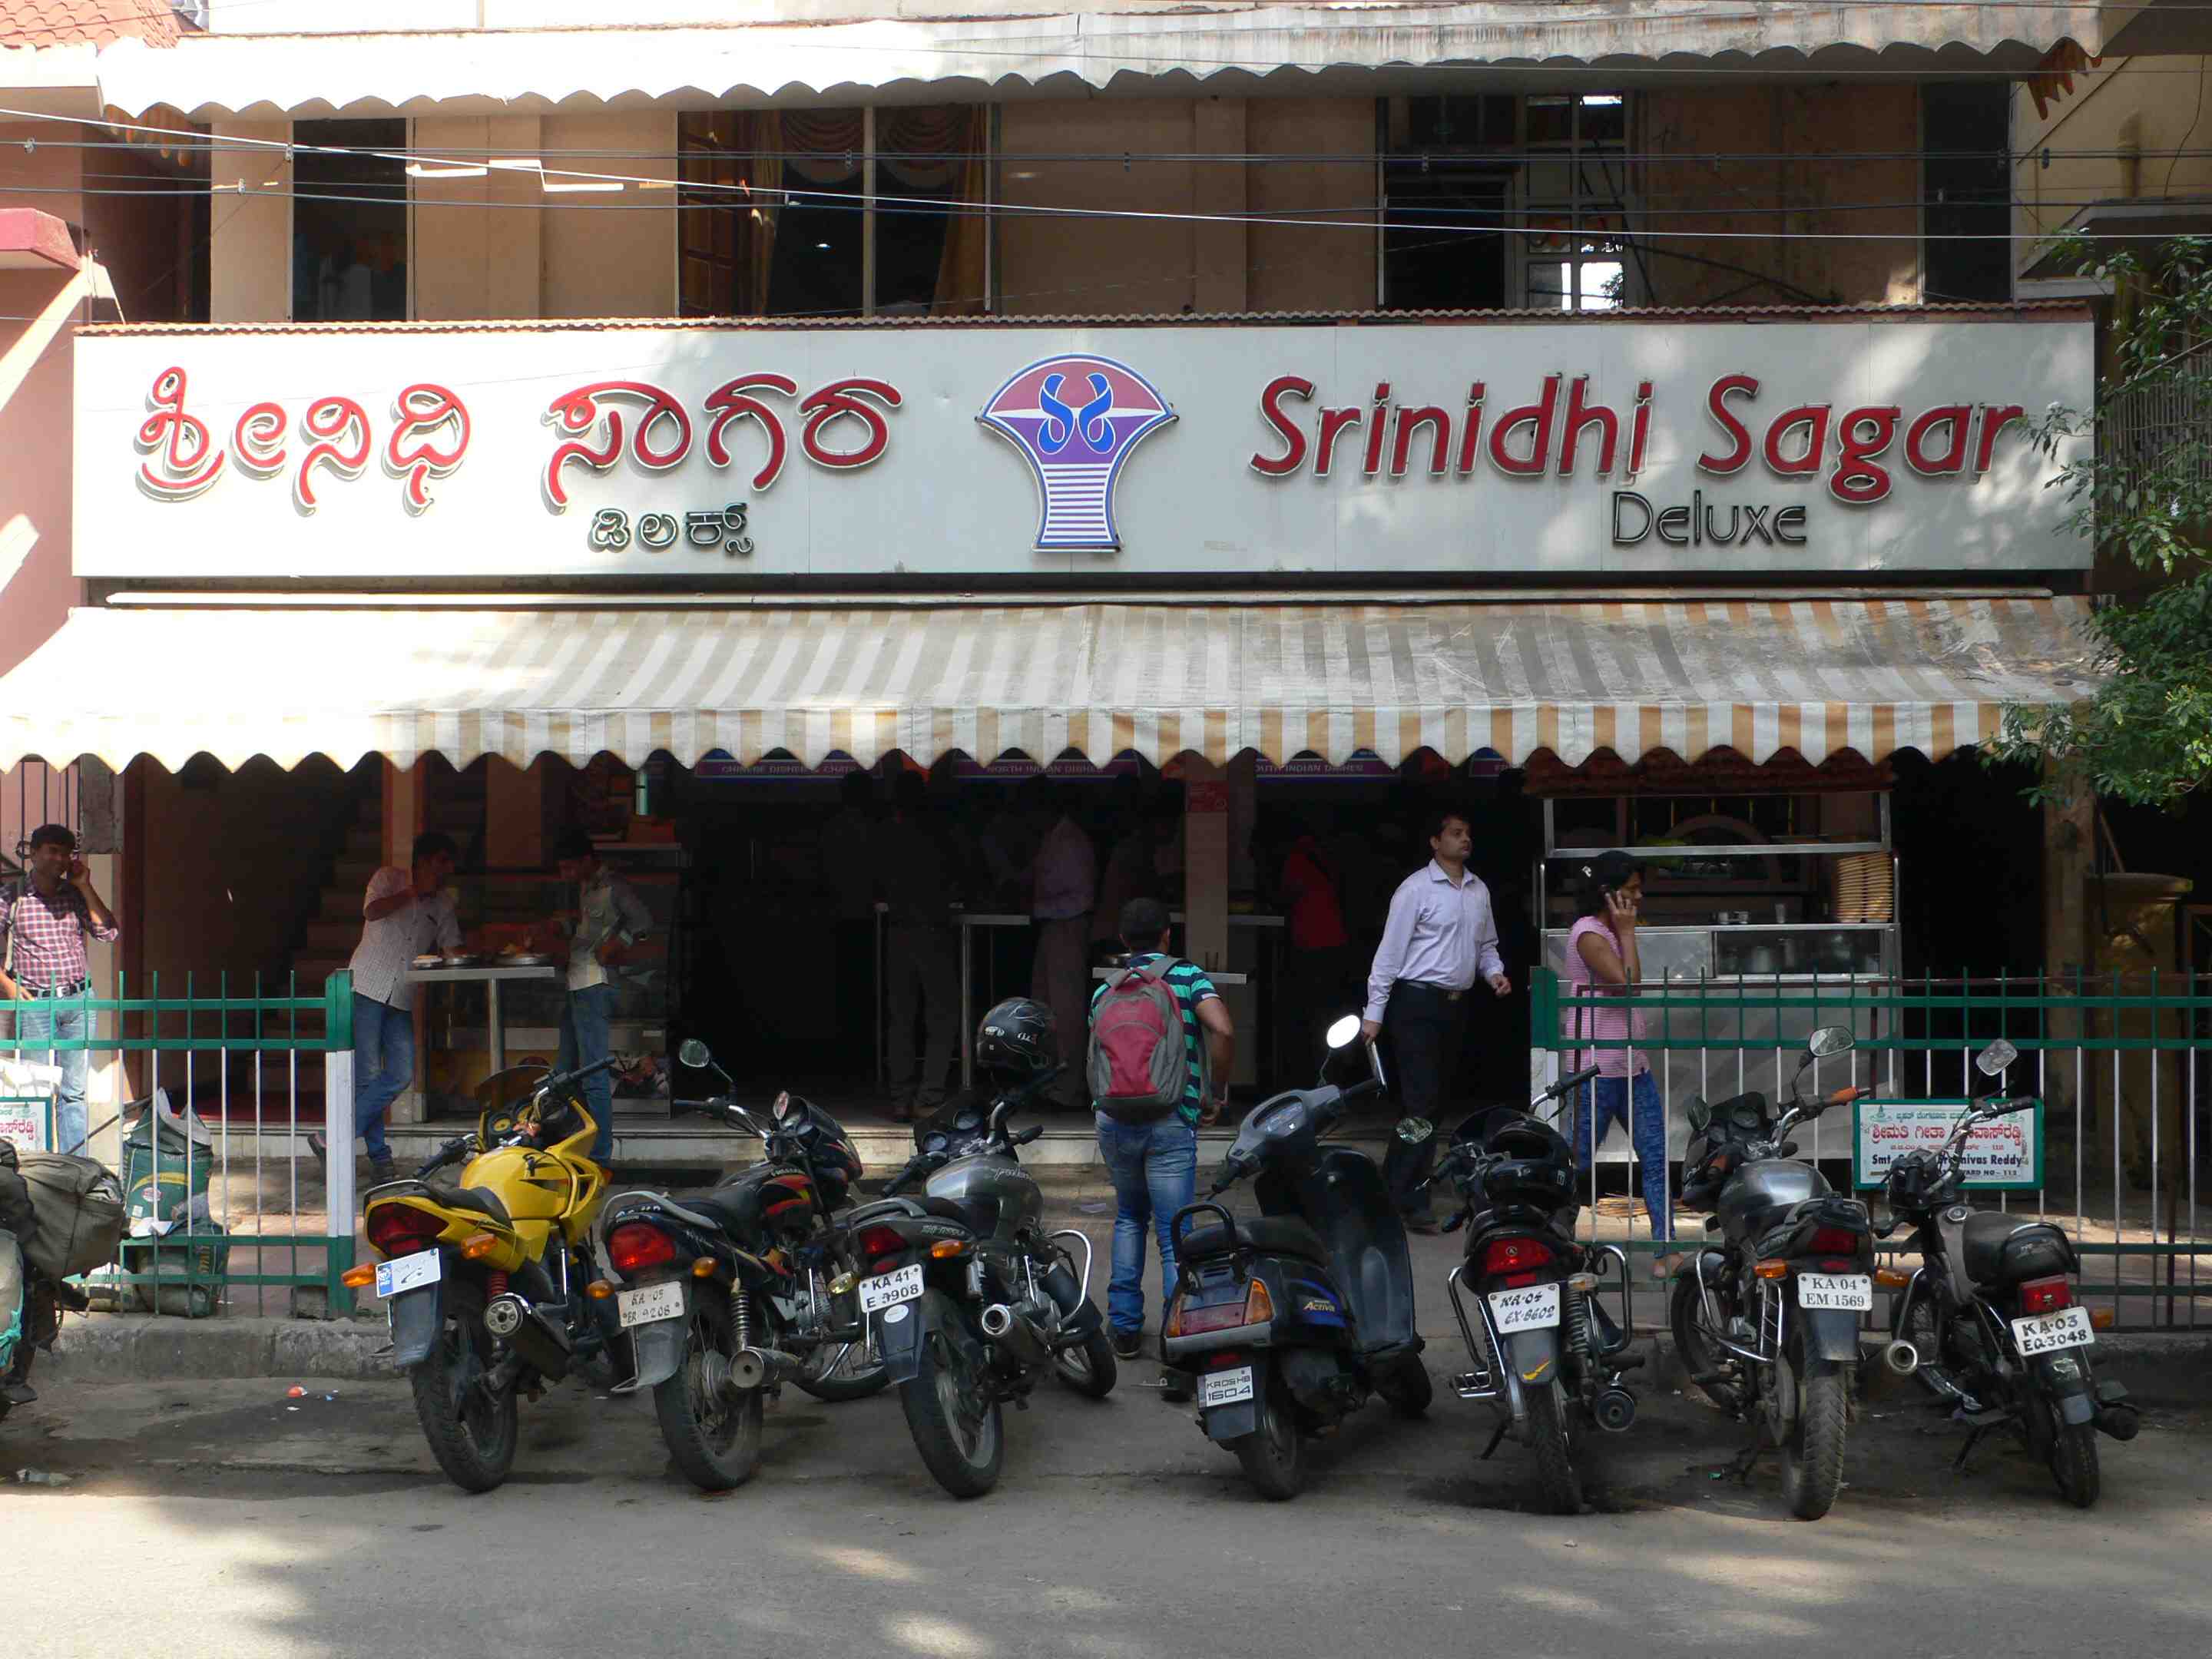  My first South Indian Fastfood